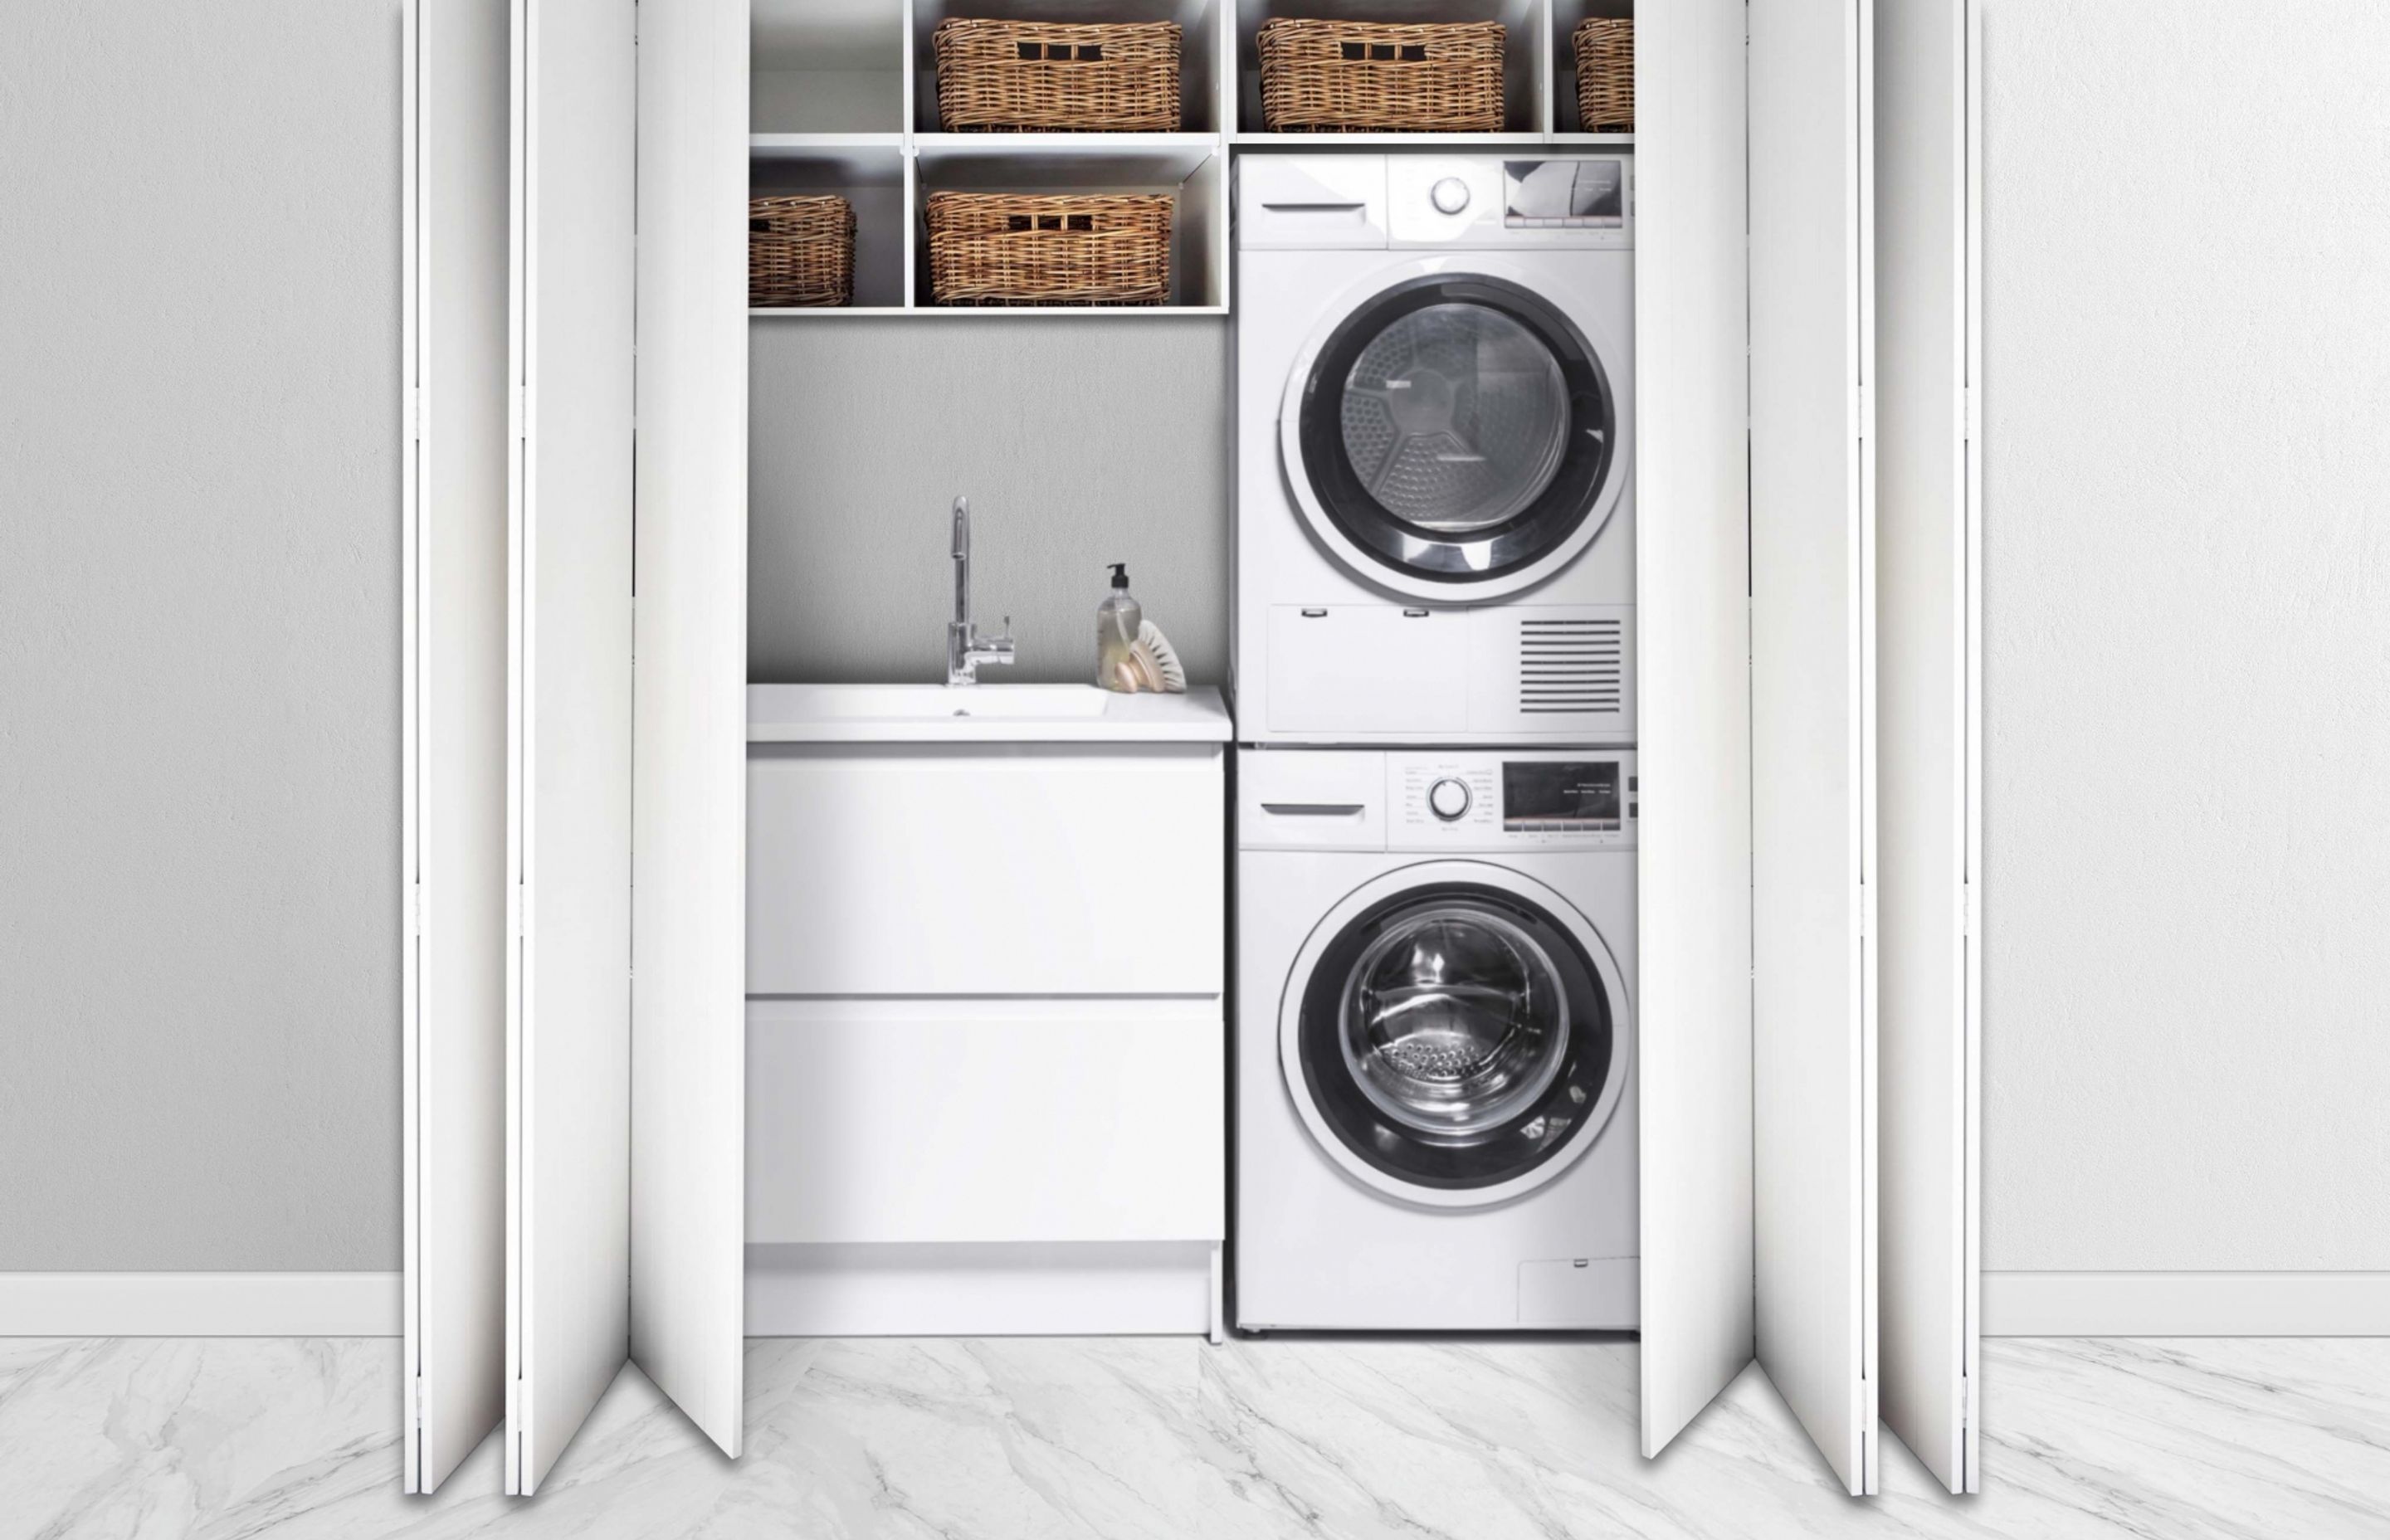 A Basic Guide To: Laundry Design